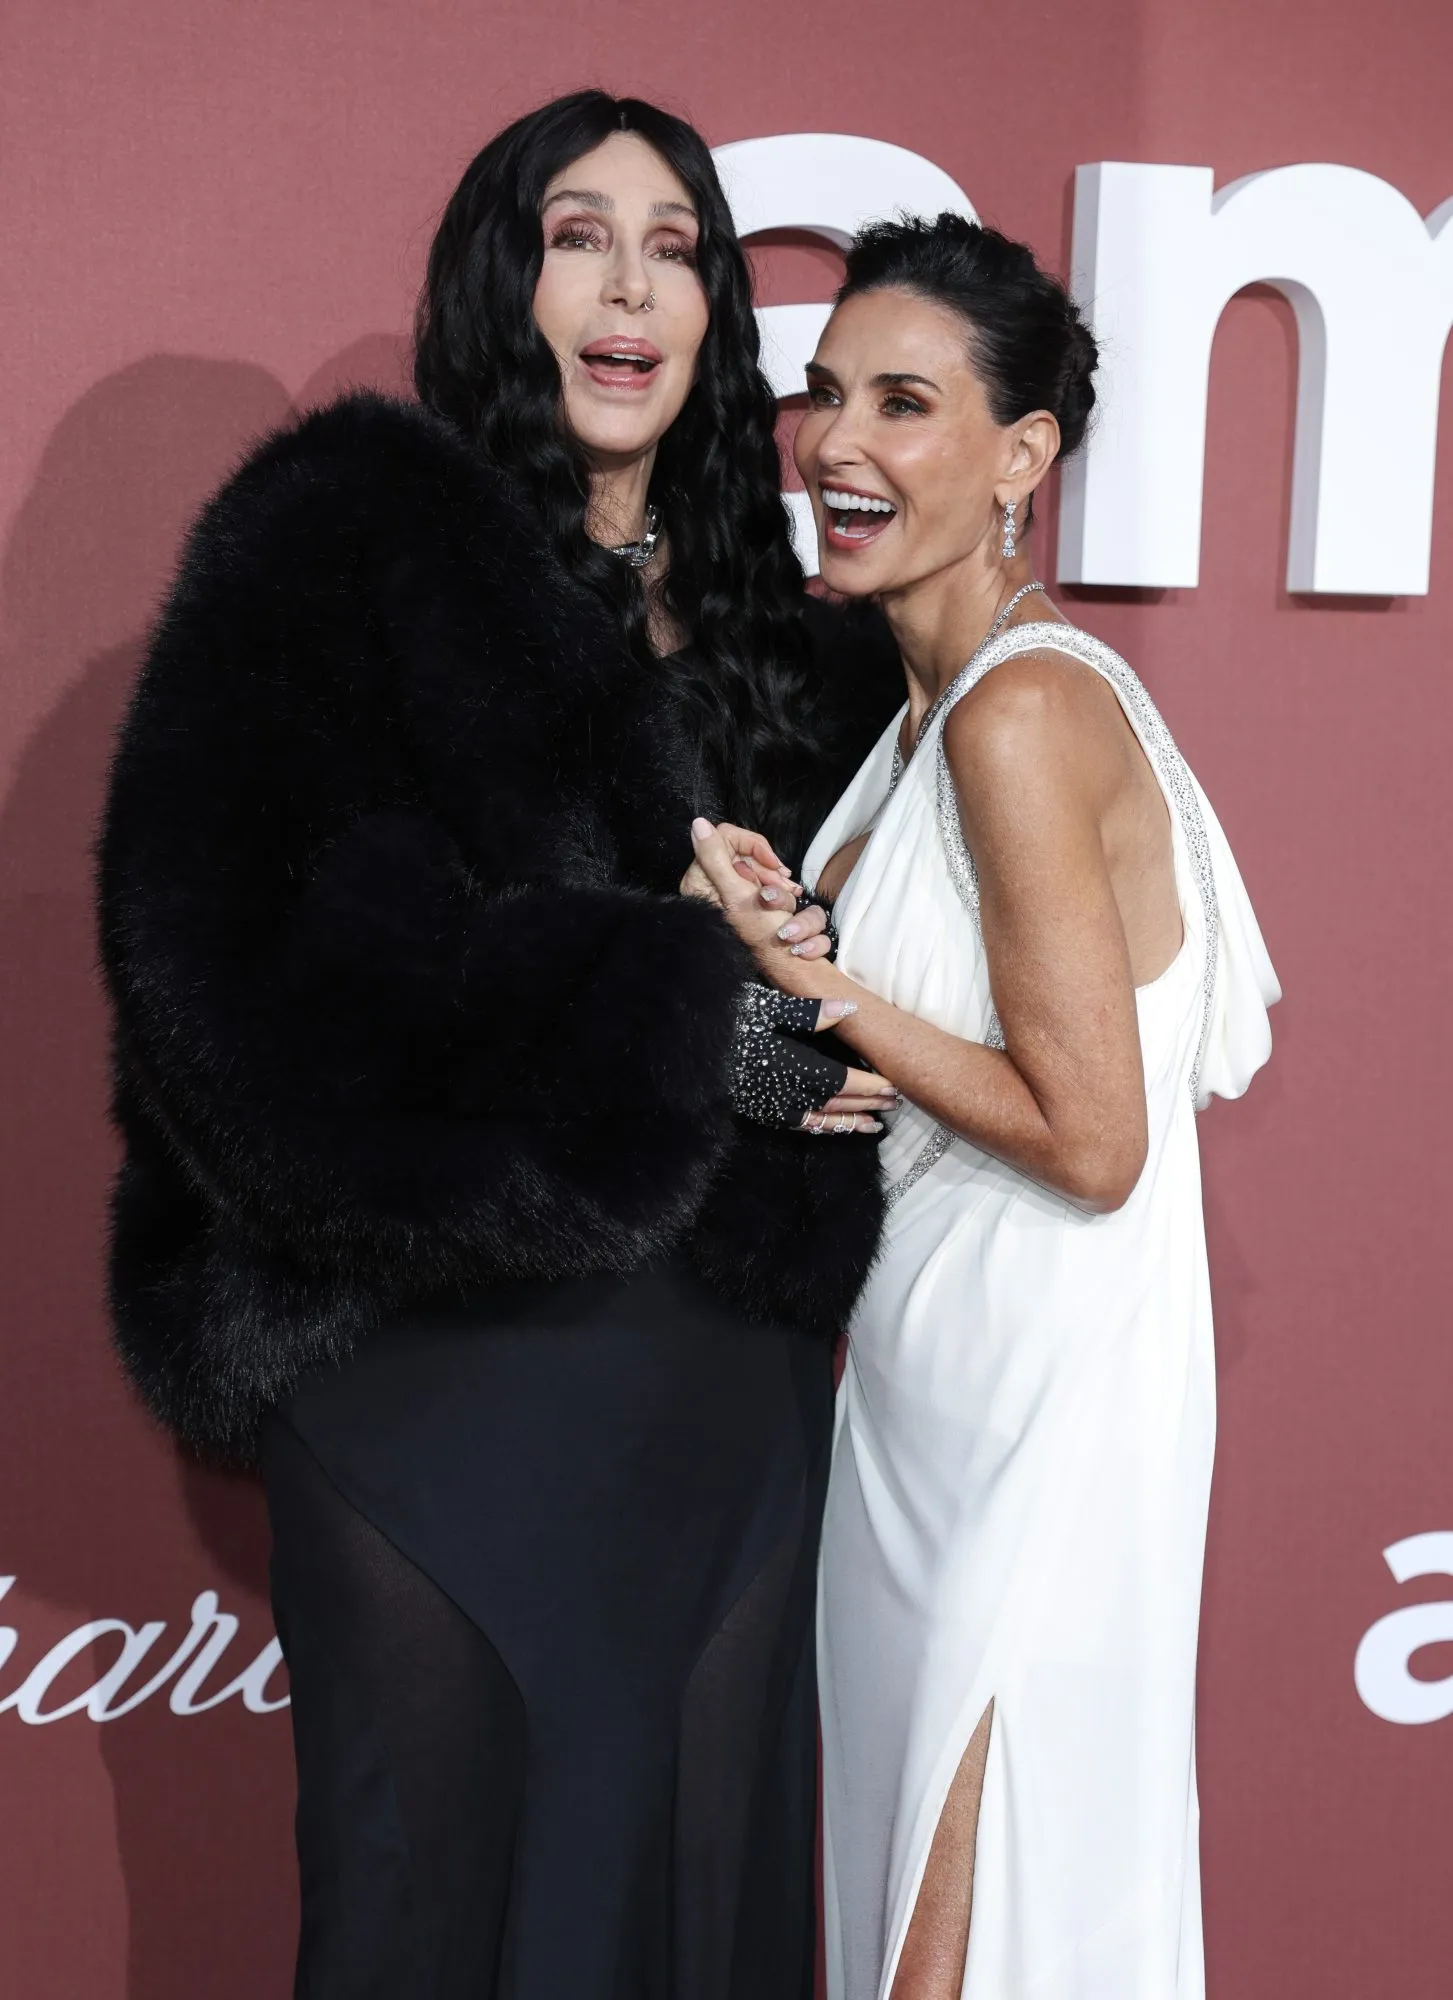 Is This The Moment We've All Been Waiting For? Demi Moore's Epic Clapback at Cannes Steals the Spotlight